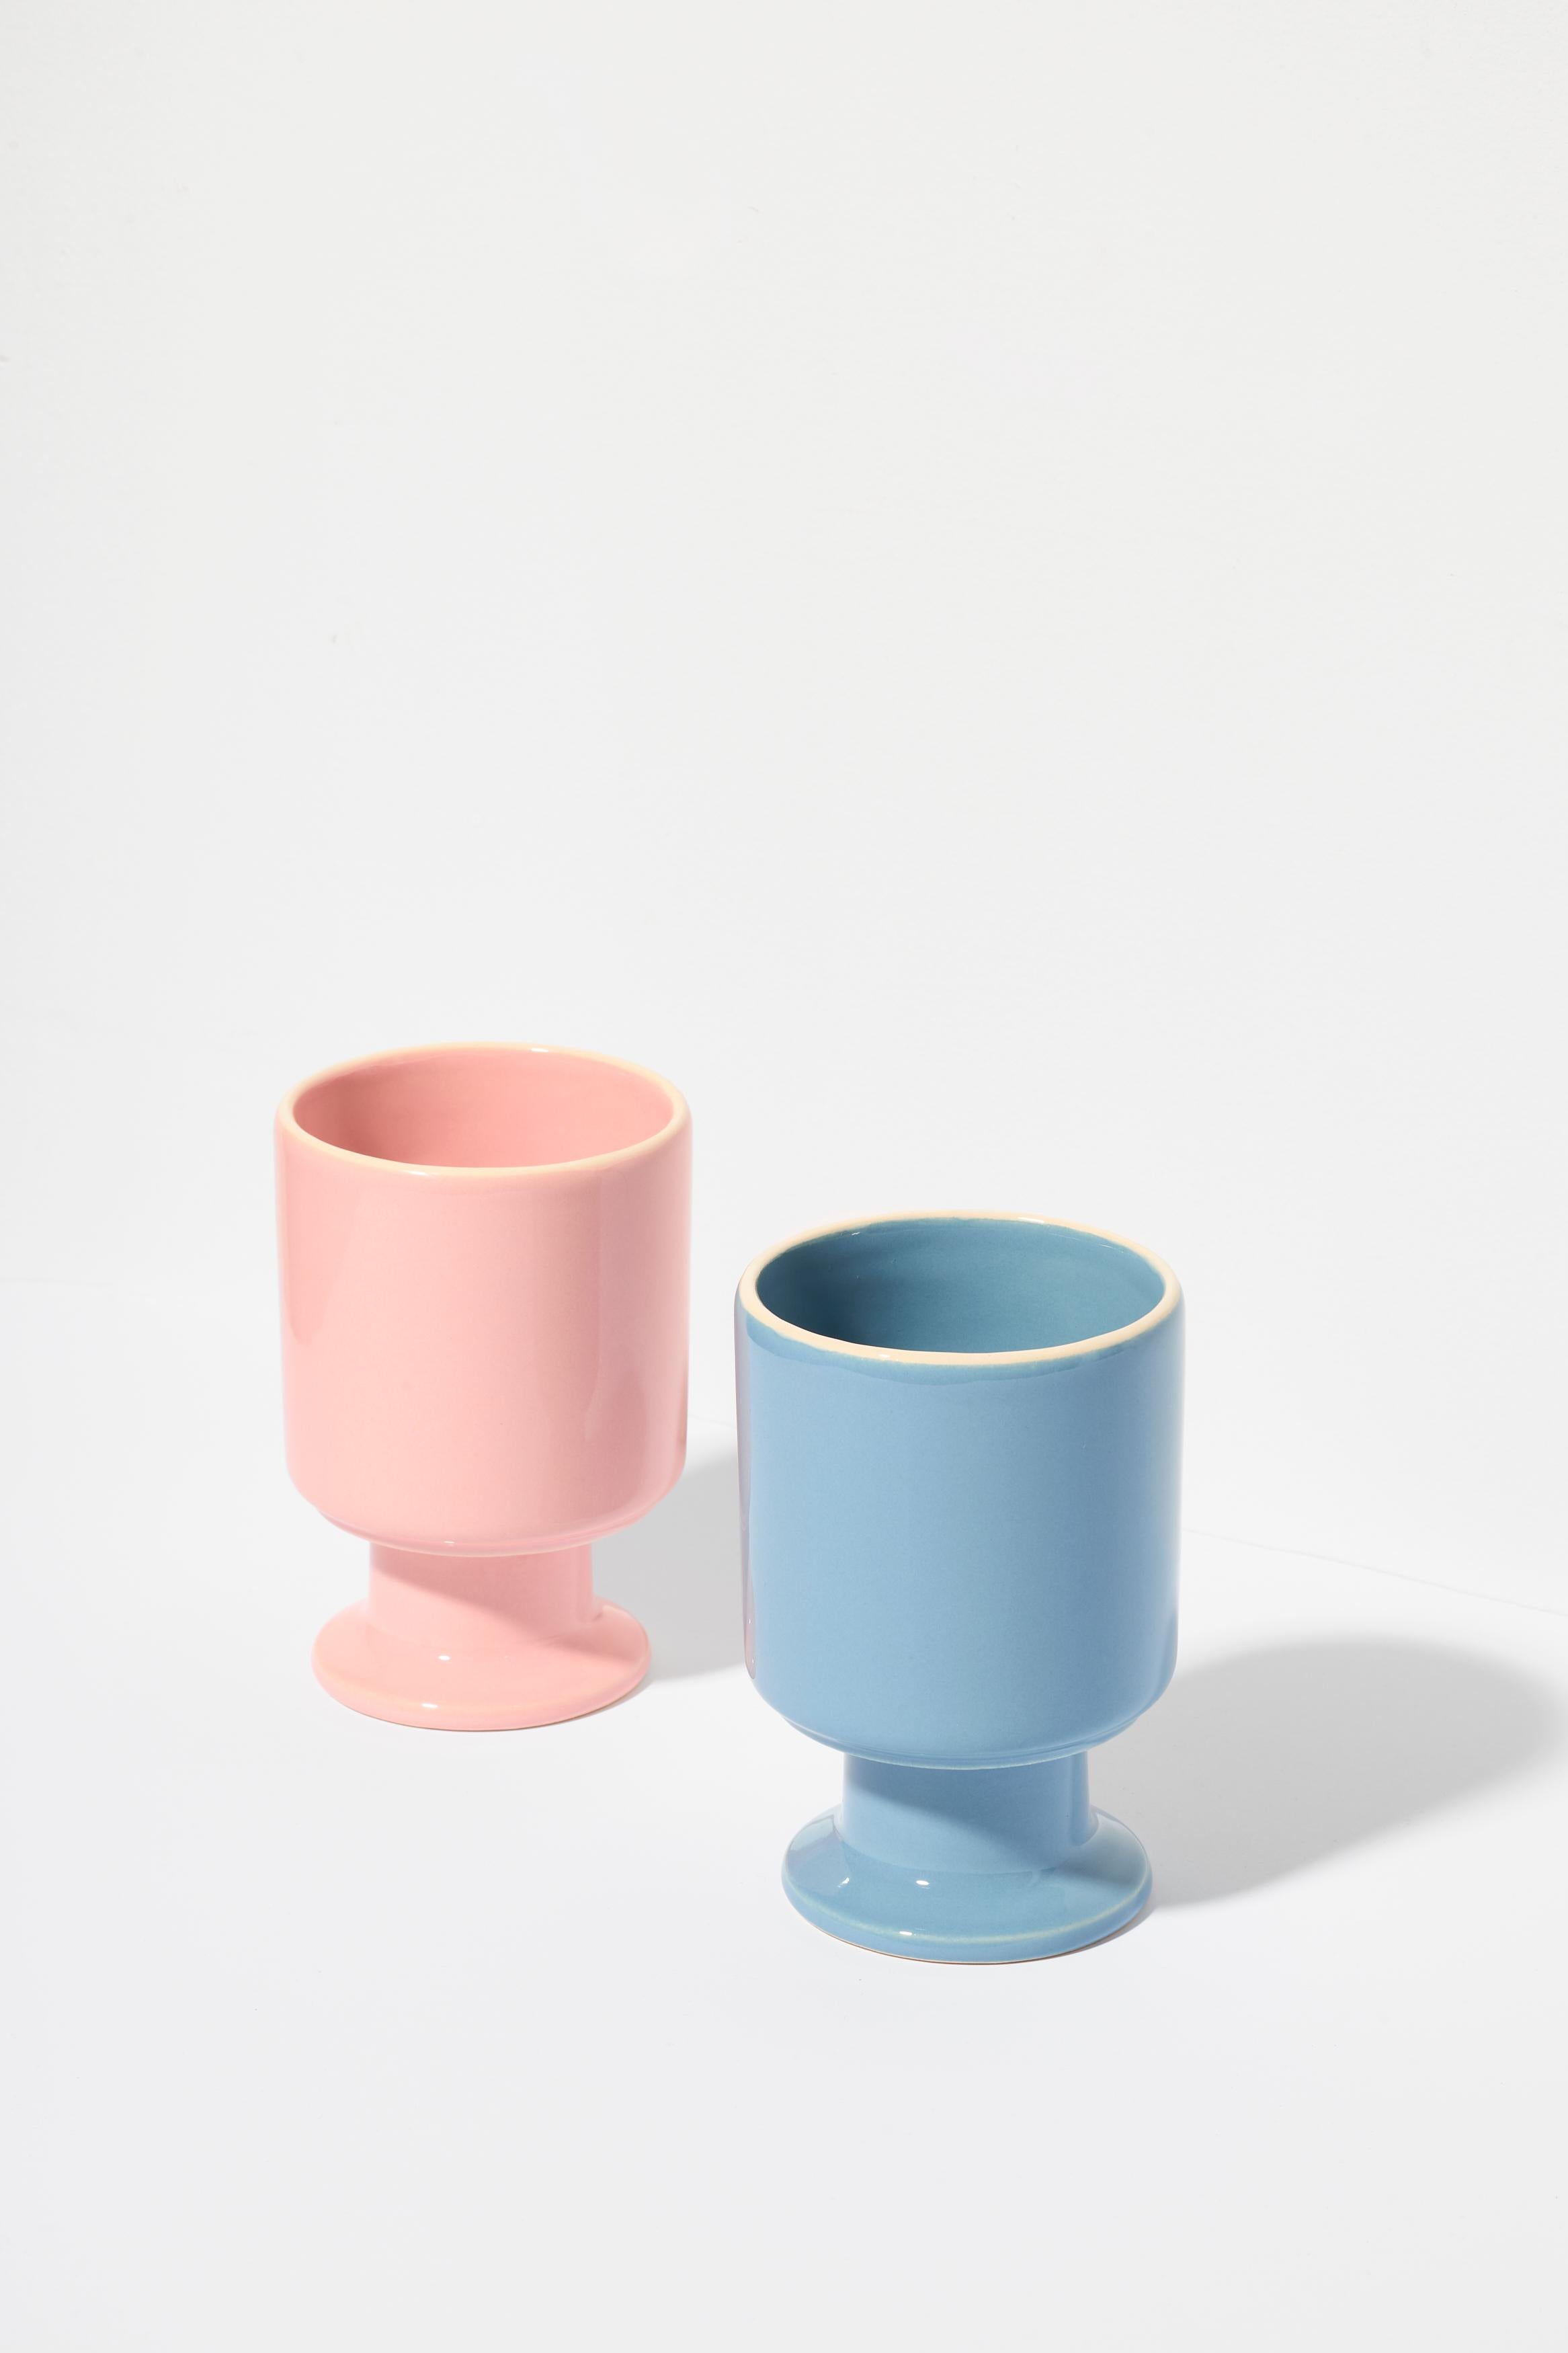 Set of two WIT cup Candy and Denim.

The WIT cup is a multifunctional vessel with a playful stem. It can become your favorite coffee cup, a dessert bowl, a container for pens, or other favorite accessories. WIT chalices can be stacked to create